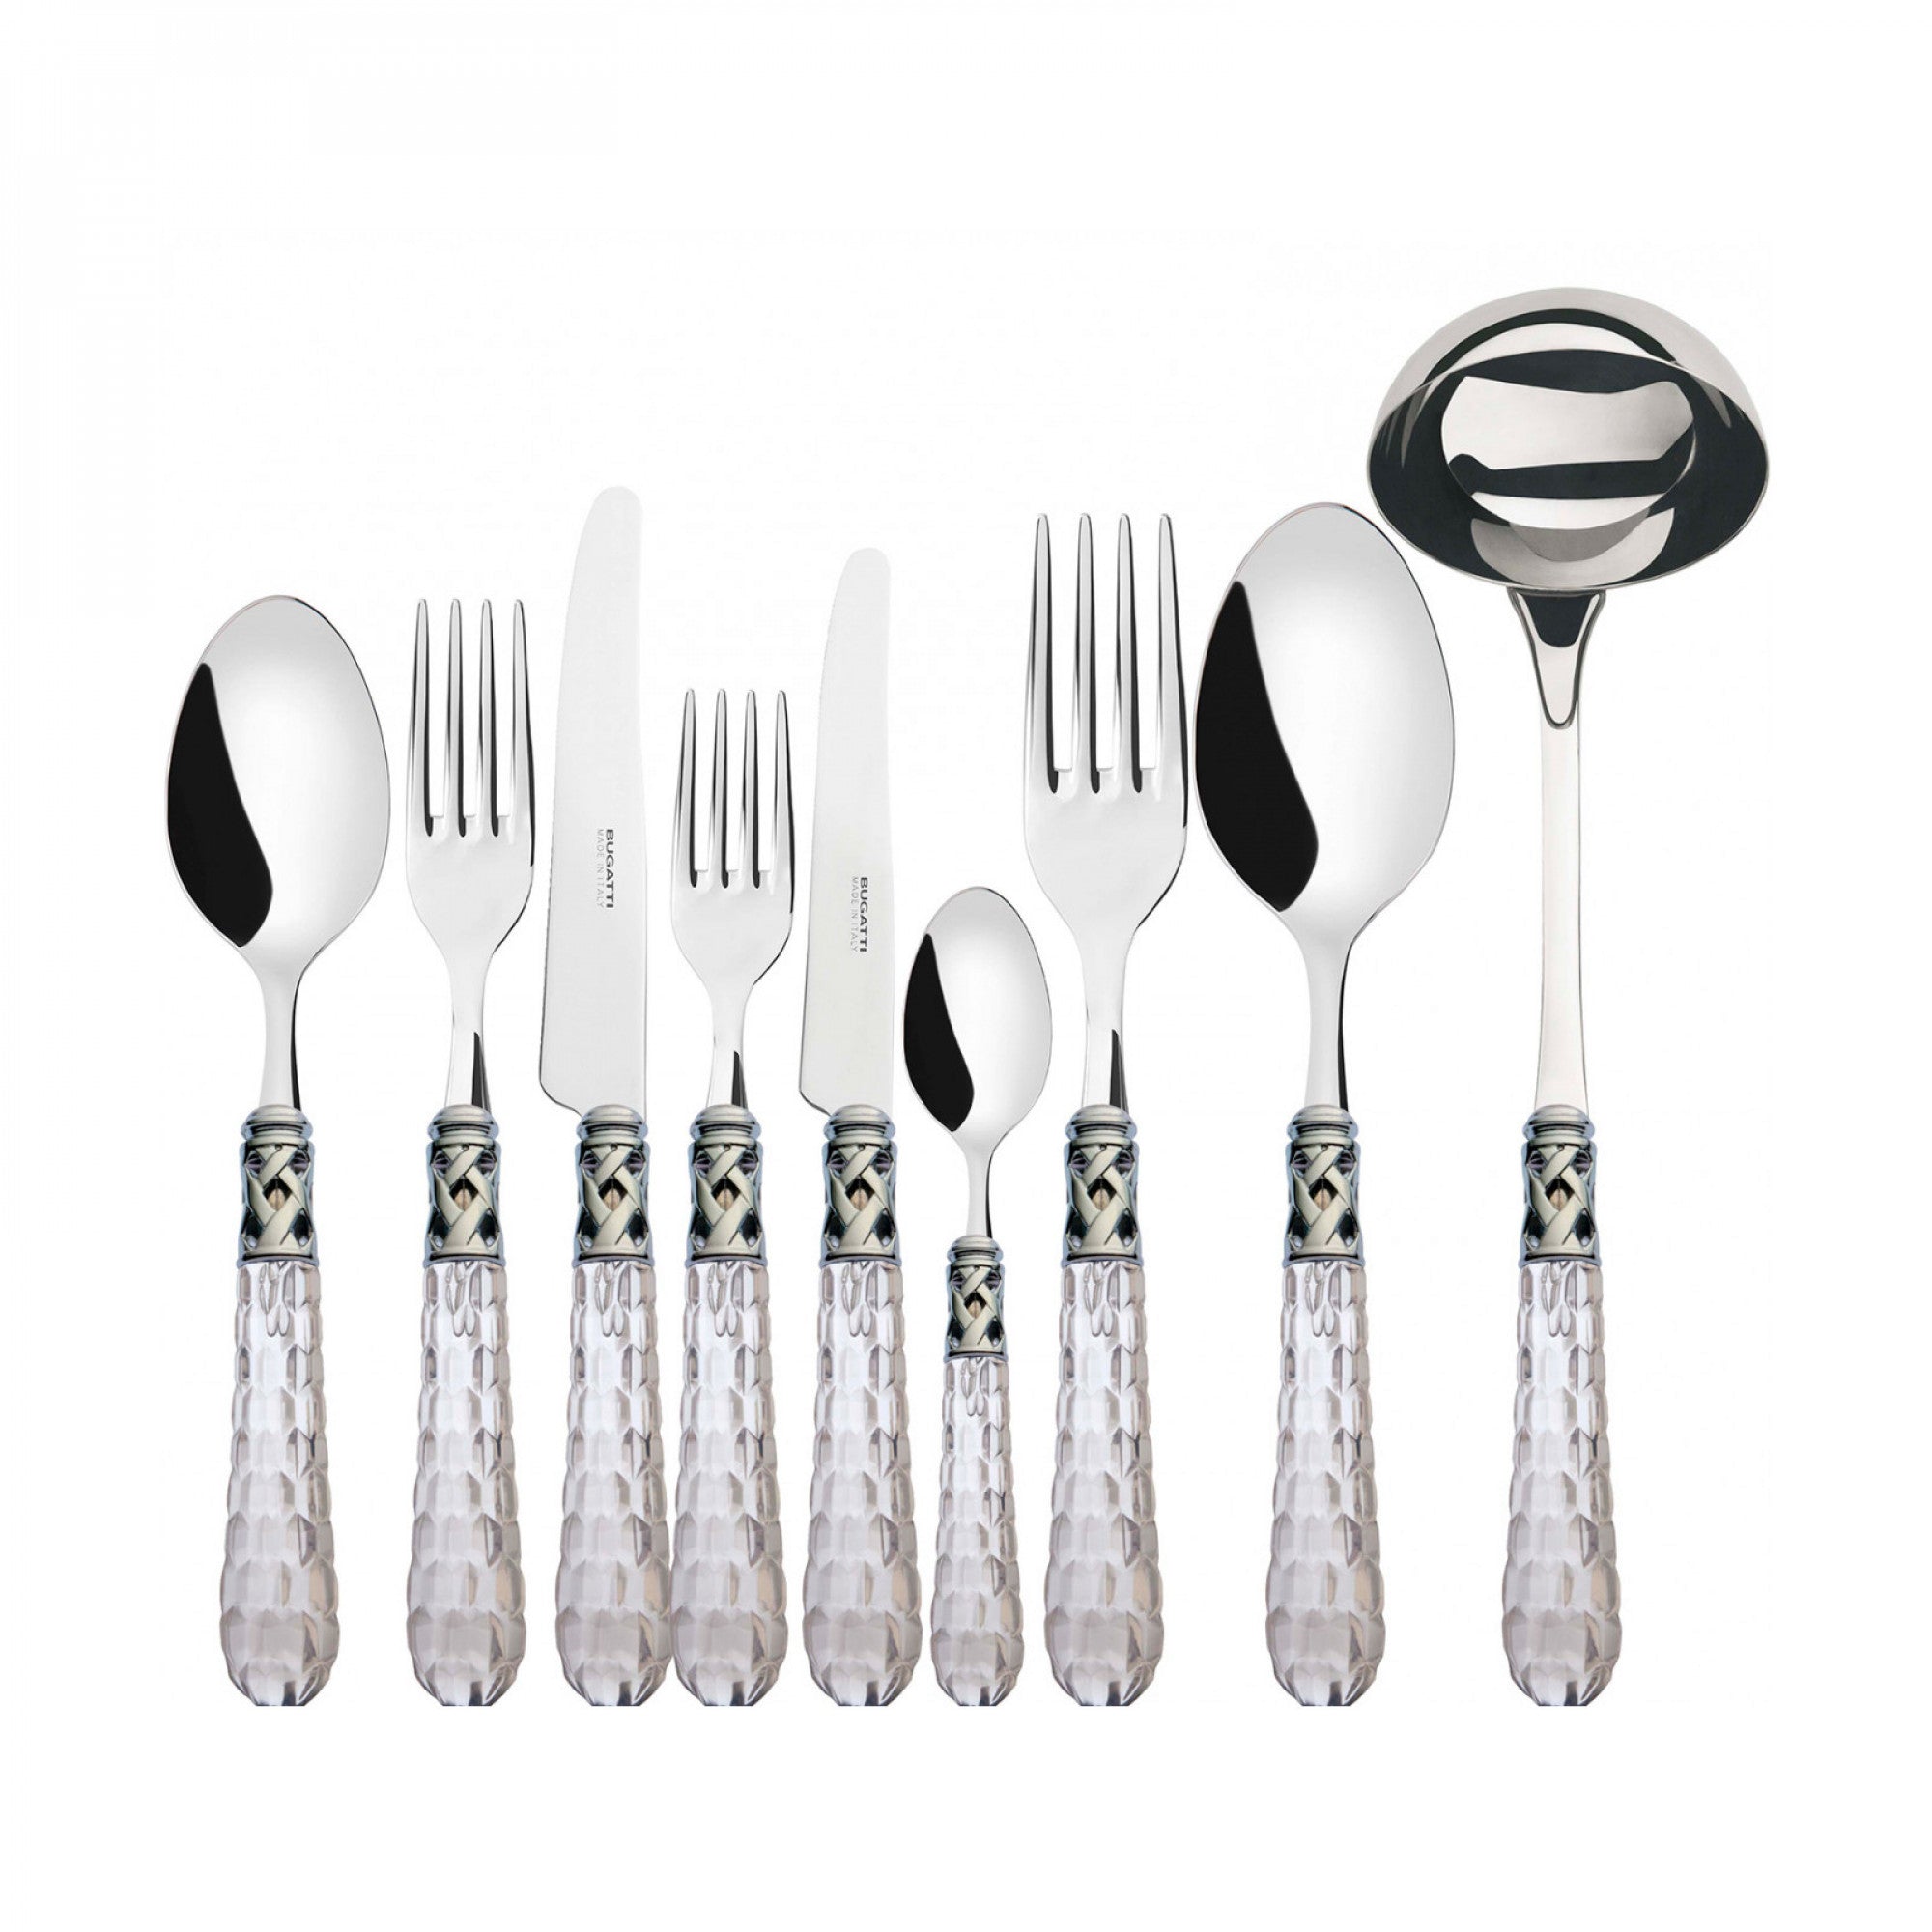 BUGATTI, Bohemia, 75-piece cutlery set in 18/10 stainless steel, chromed ring. Packaged in wooden case with wengé finish